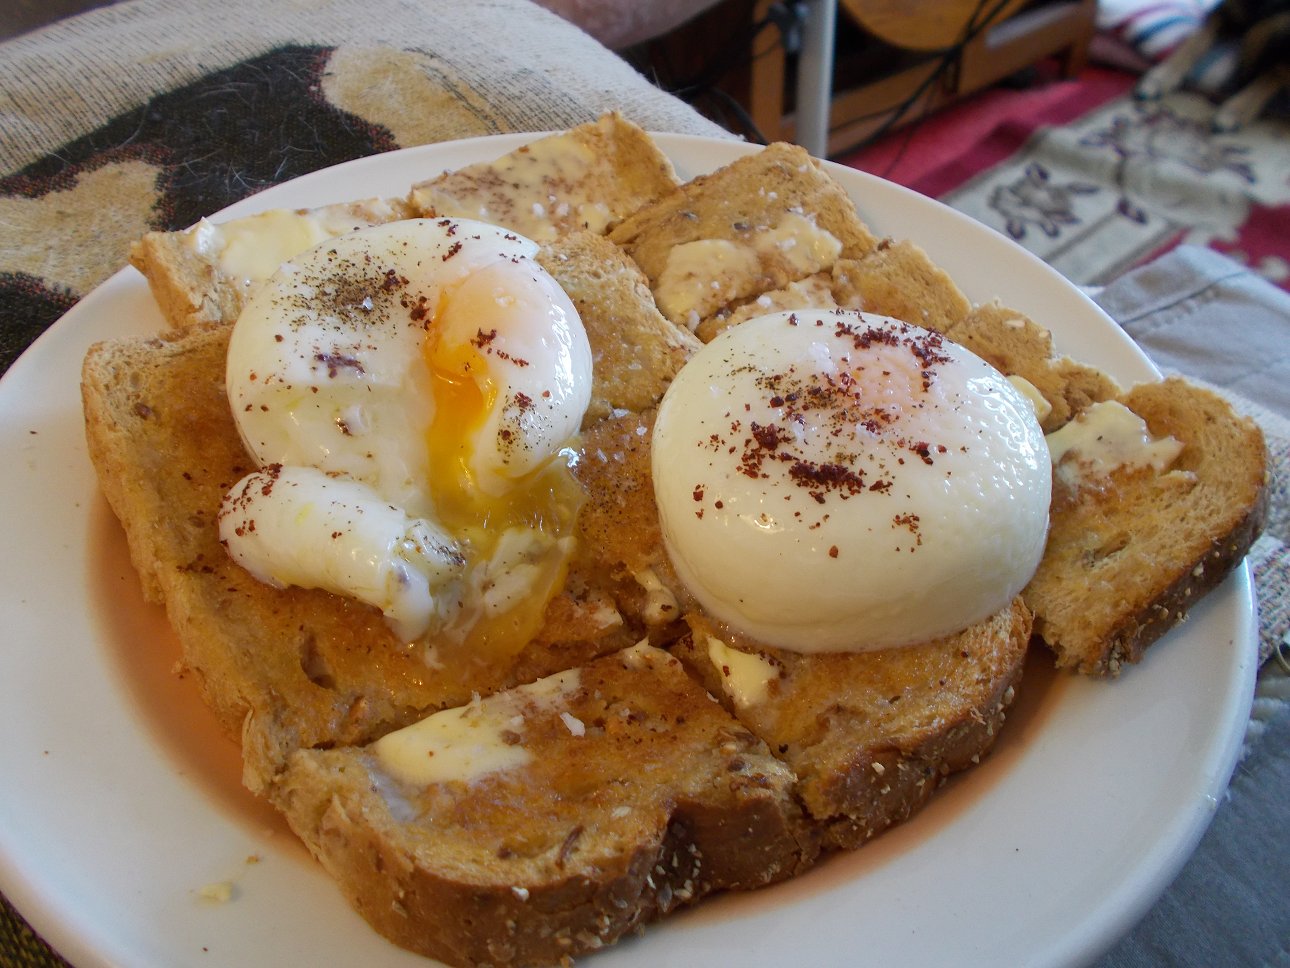 Jenny Eatwell's Rhubarb & Ginger: Poached eggs made with a